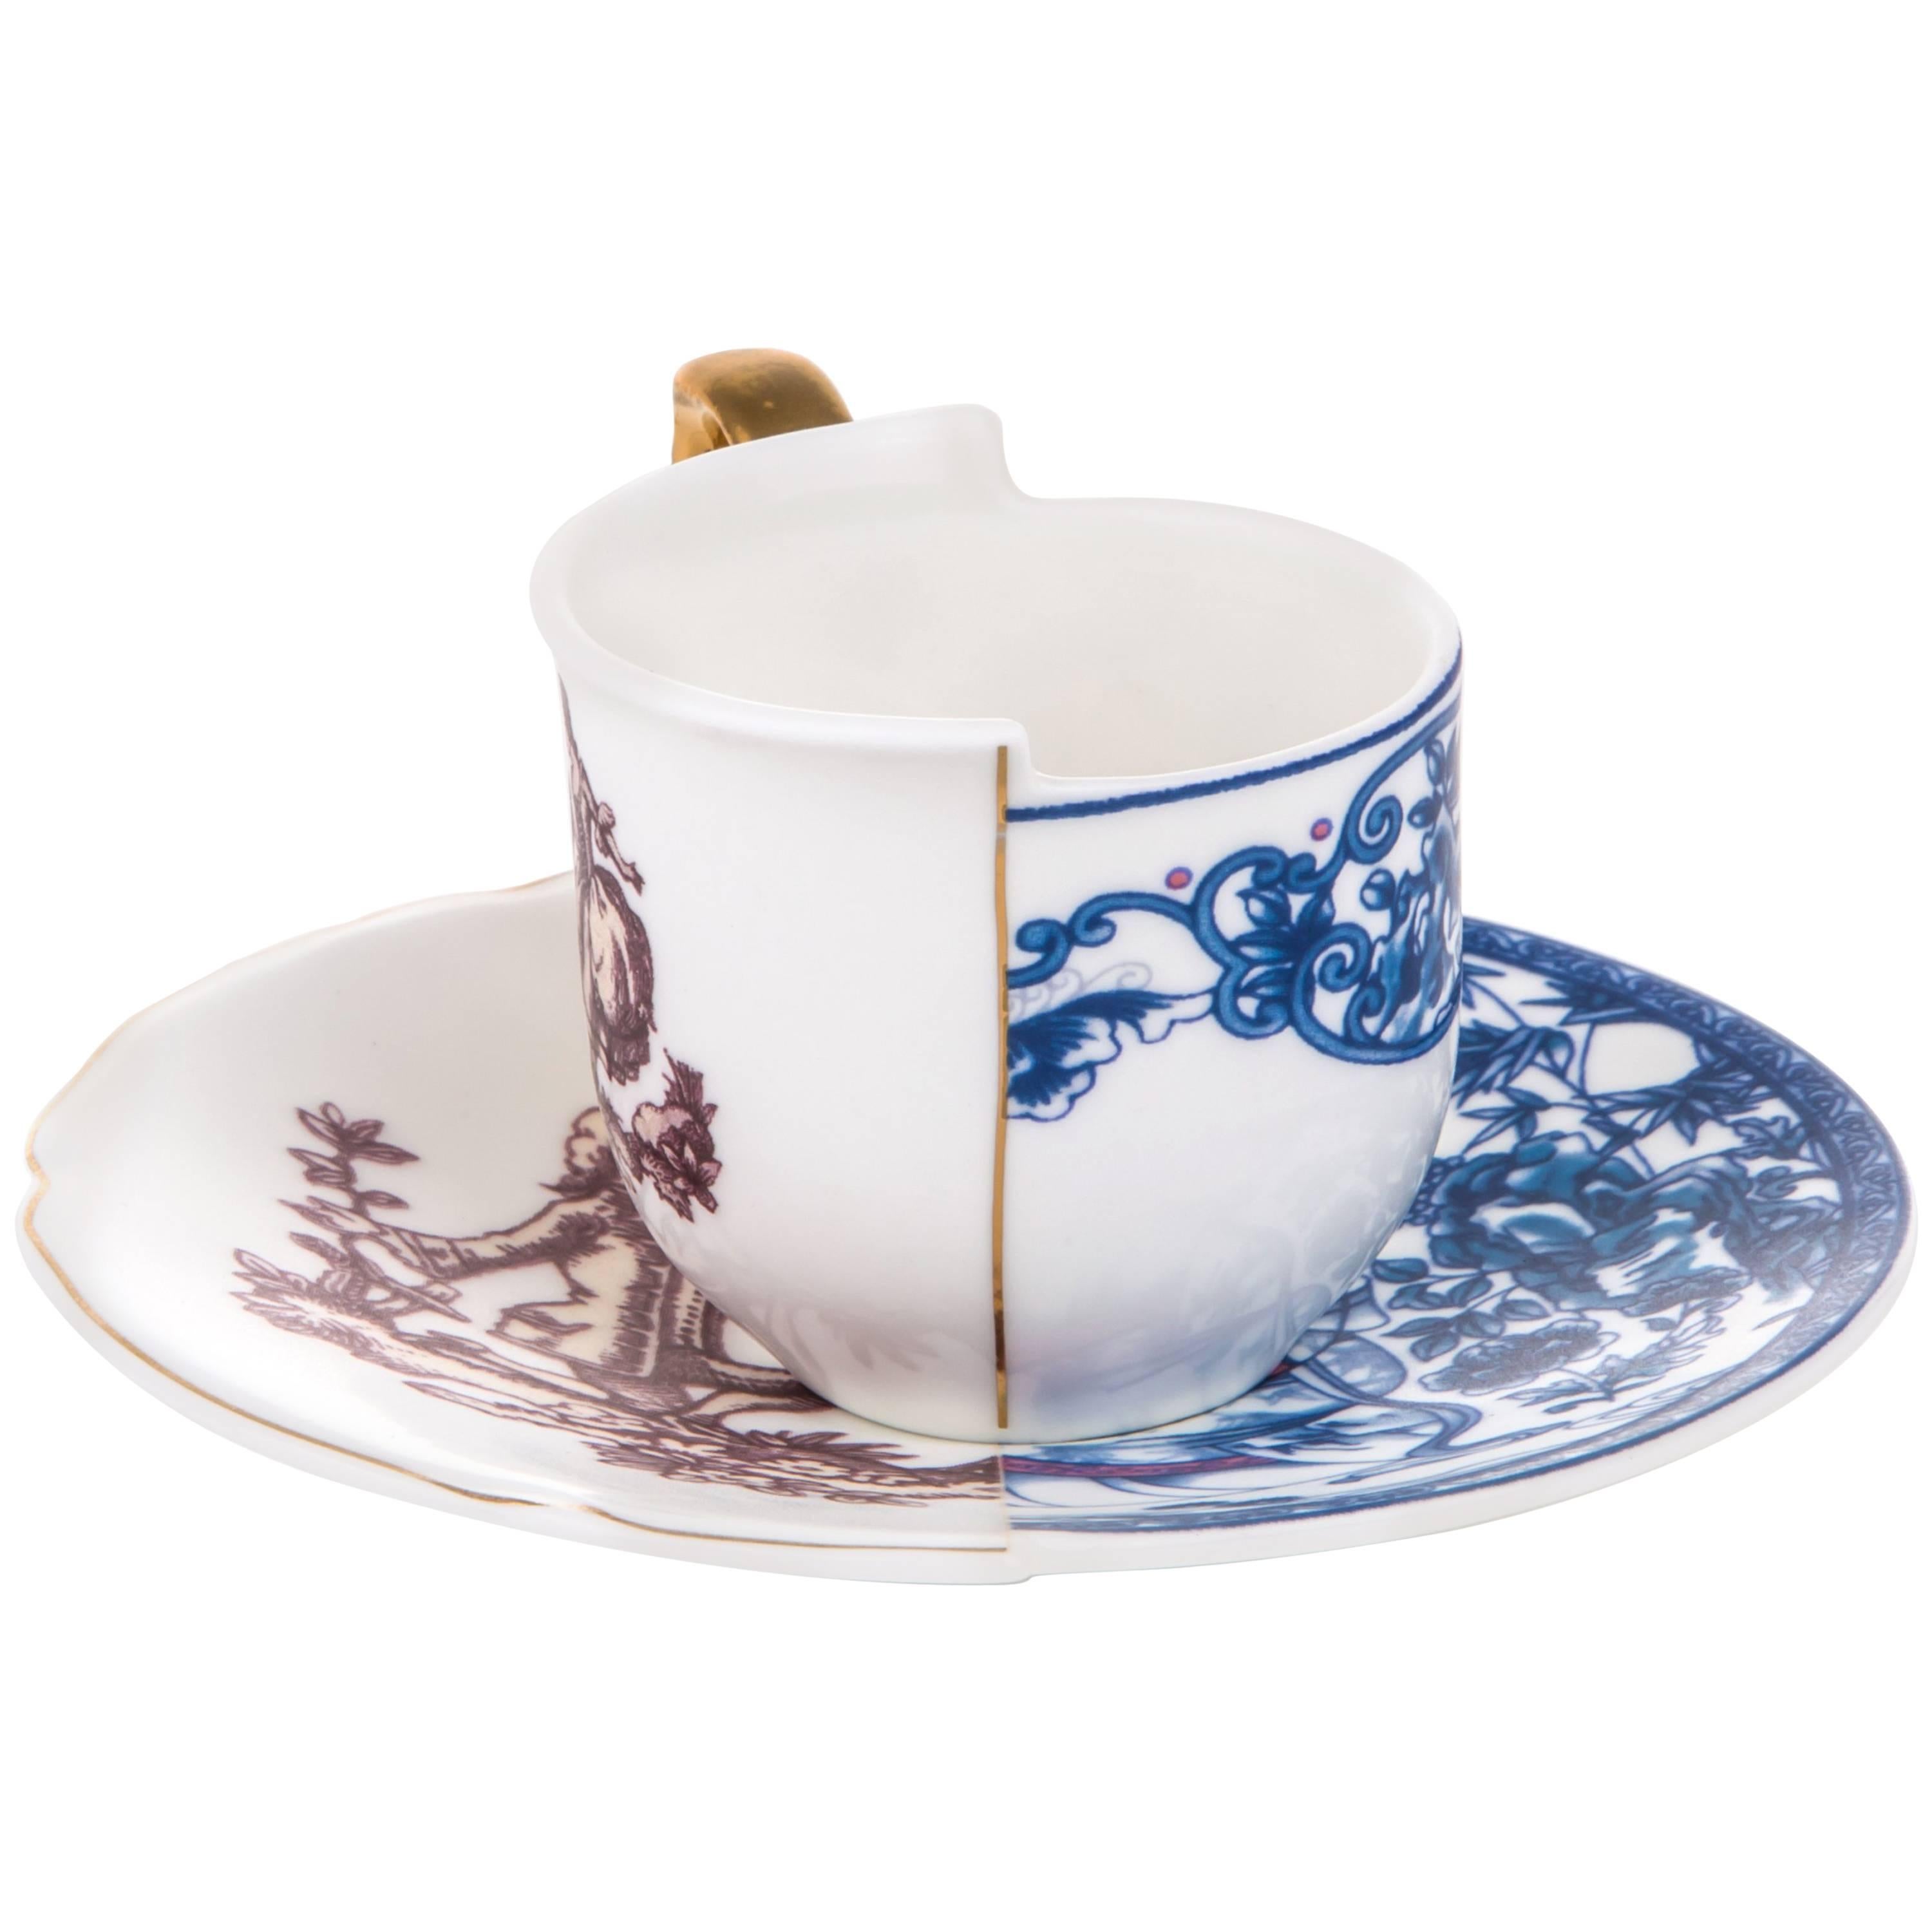 Seletti "Hybrid-Eufemia" Coffee Cup with Saucer in Porcelain For Sale